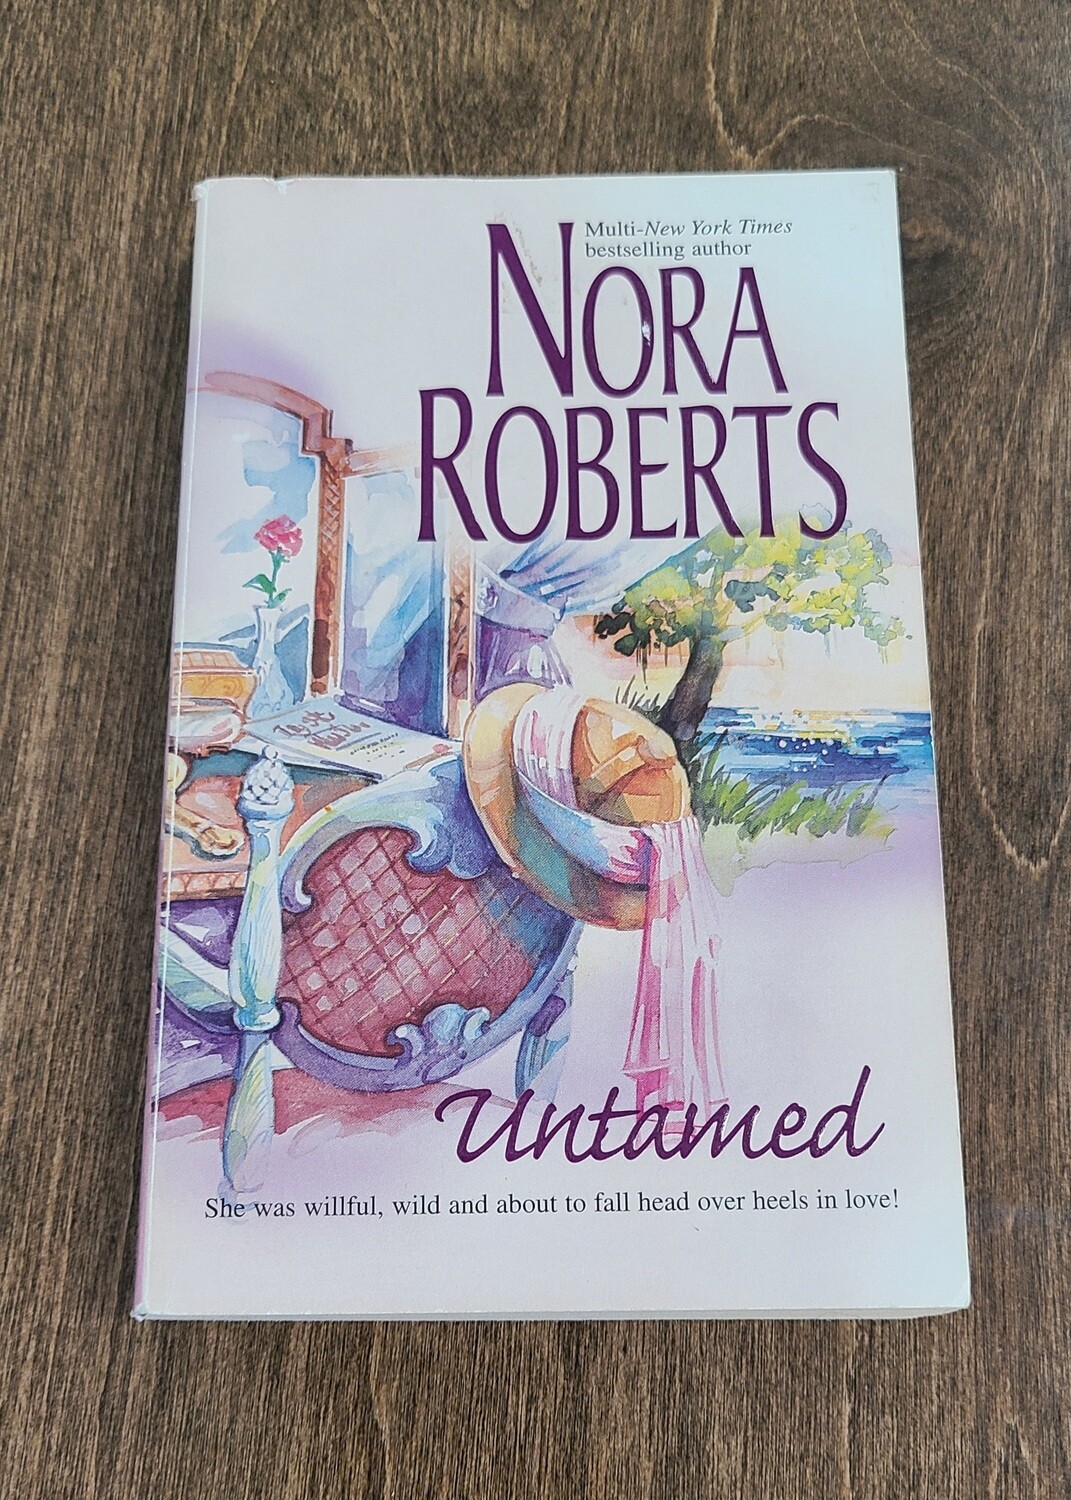 Untamed by Nora Roberts